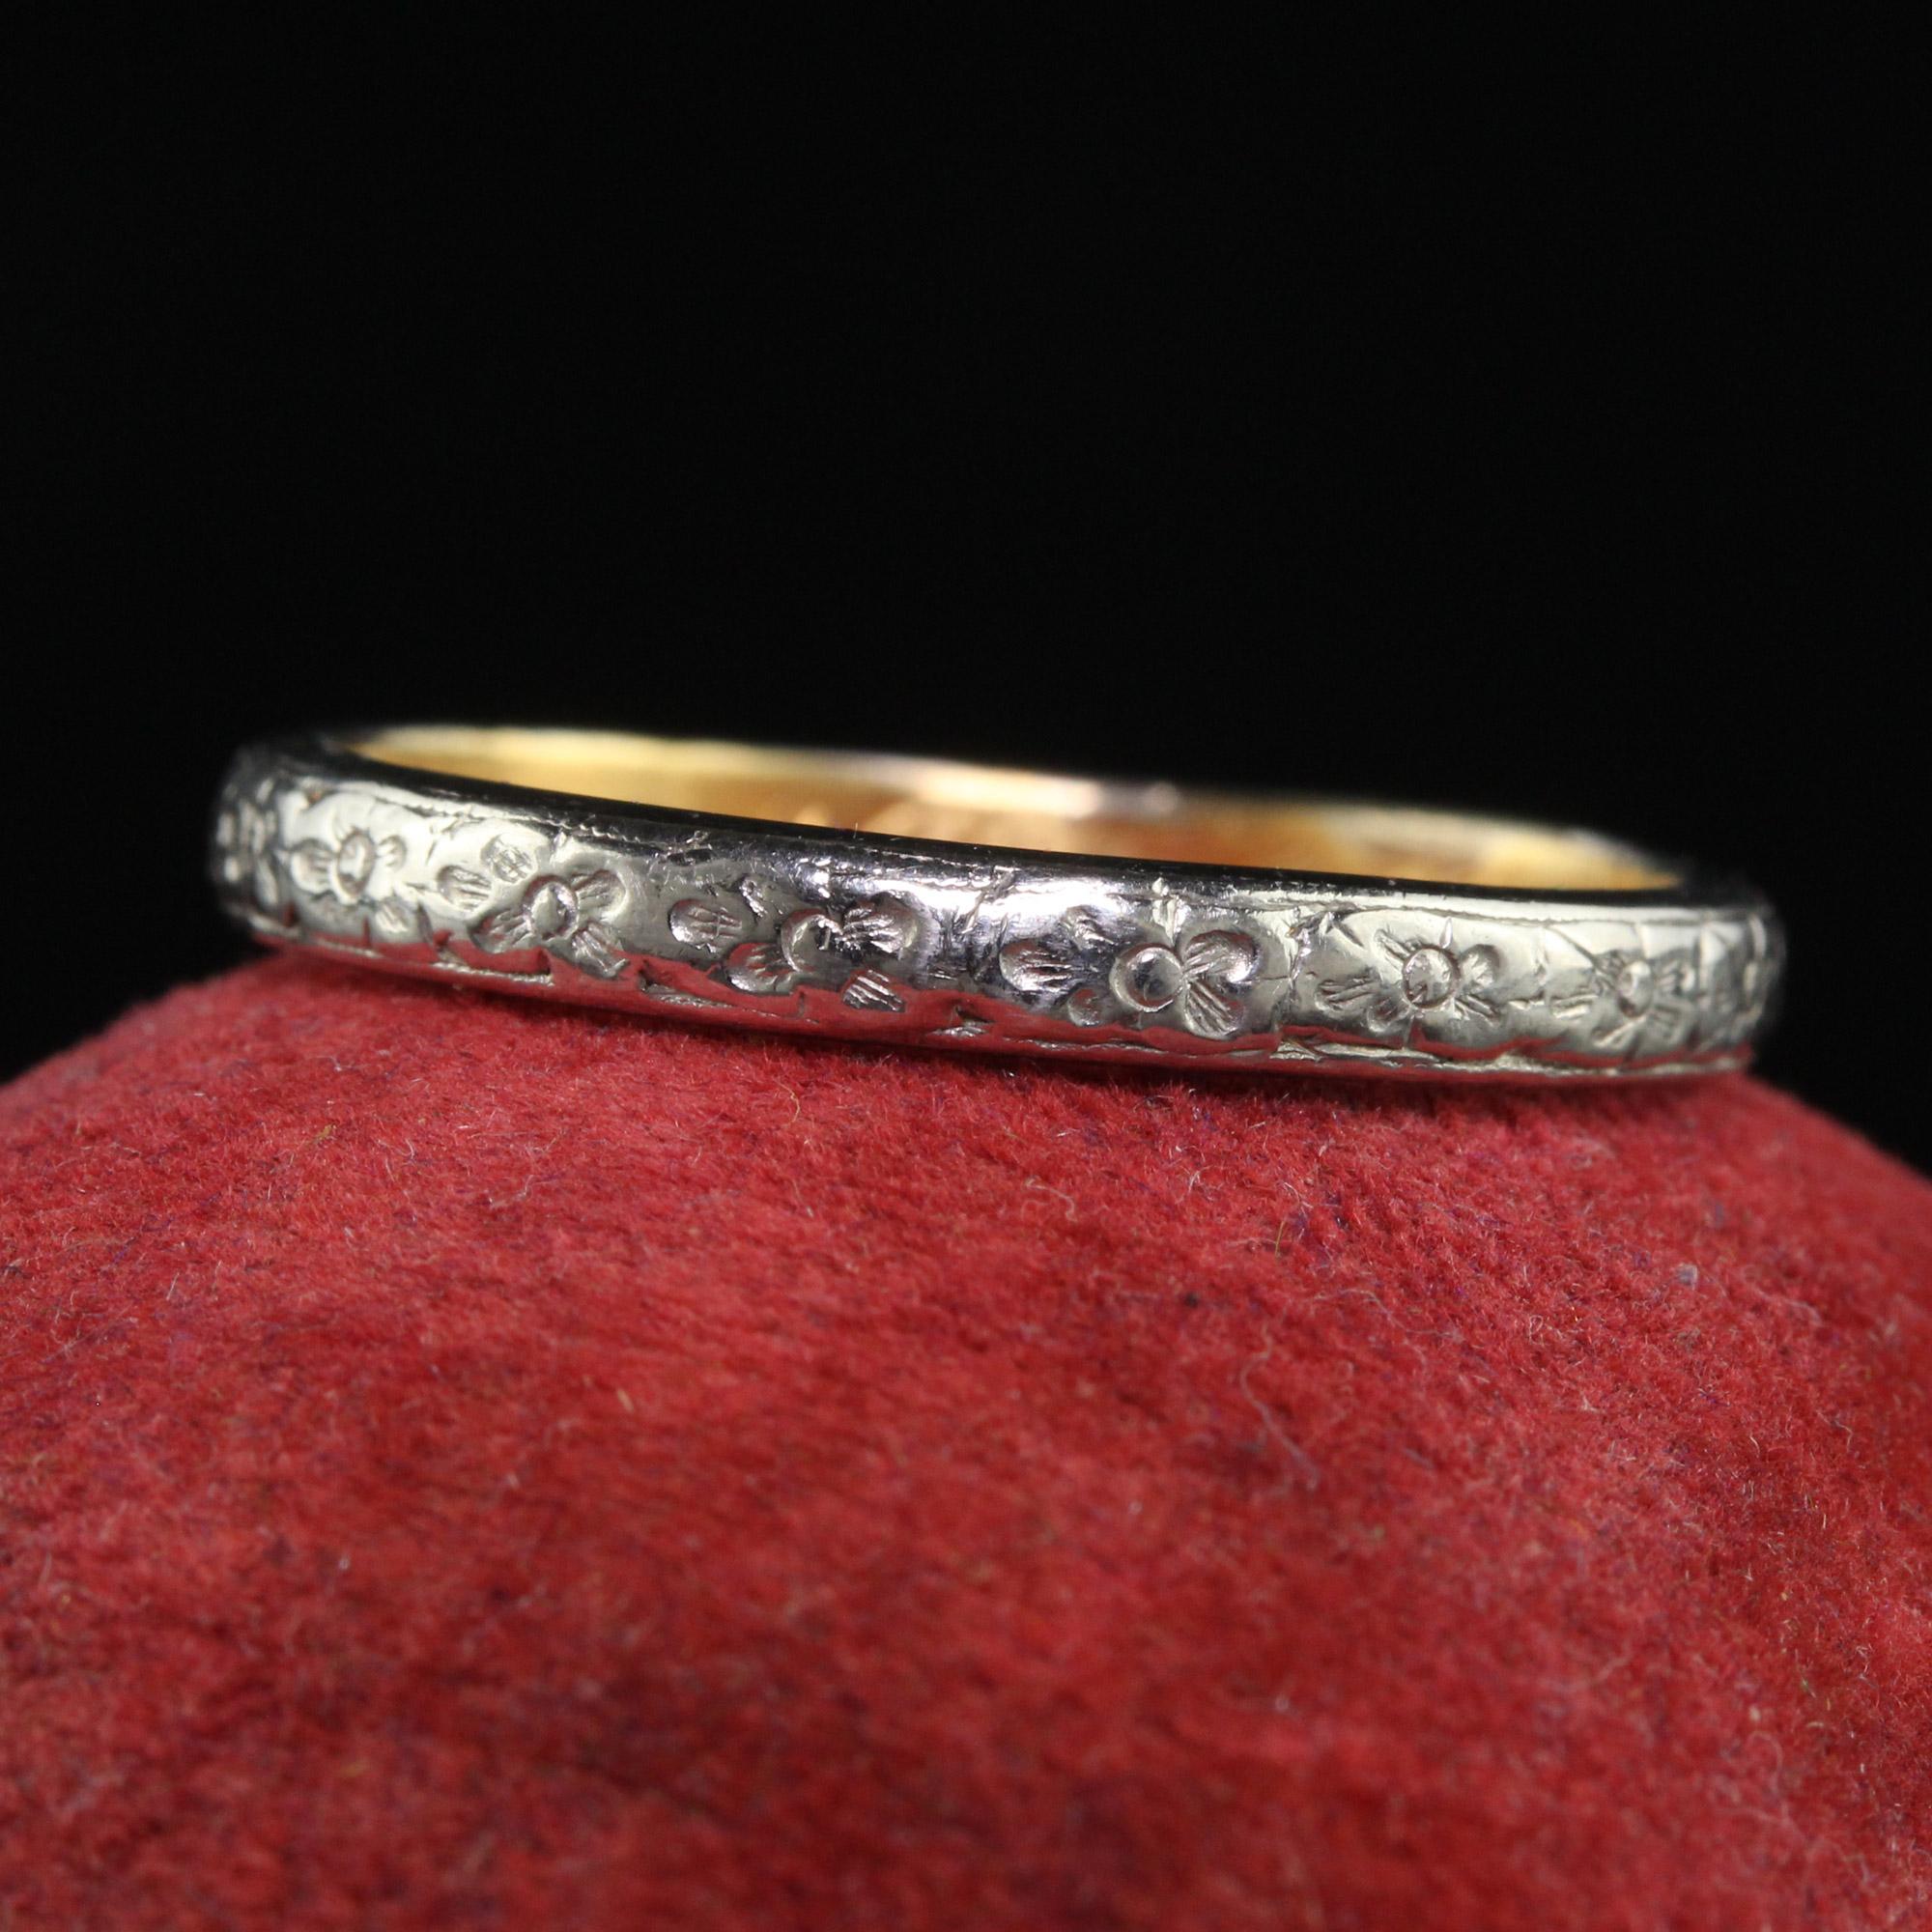 Beautiful Antique Edwardian Platinum 18K Gold Tiffany and Co Engraved Wedding Band. This This gorgeous wedding band is crafted in platinum and 18k yellow gold. The top of the ring i s beautifully engraved with blossom patterns and the inside of the